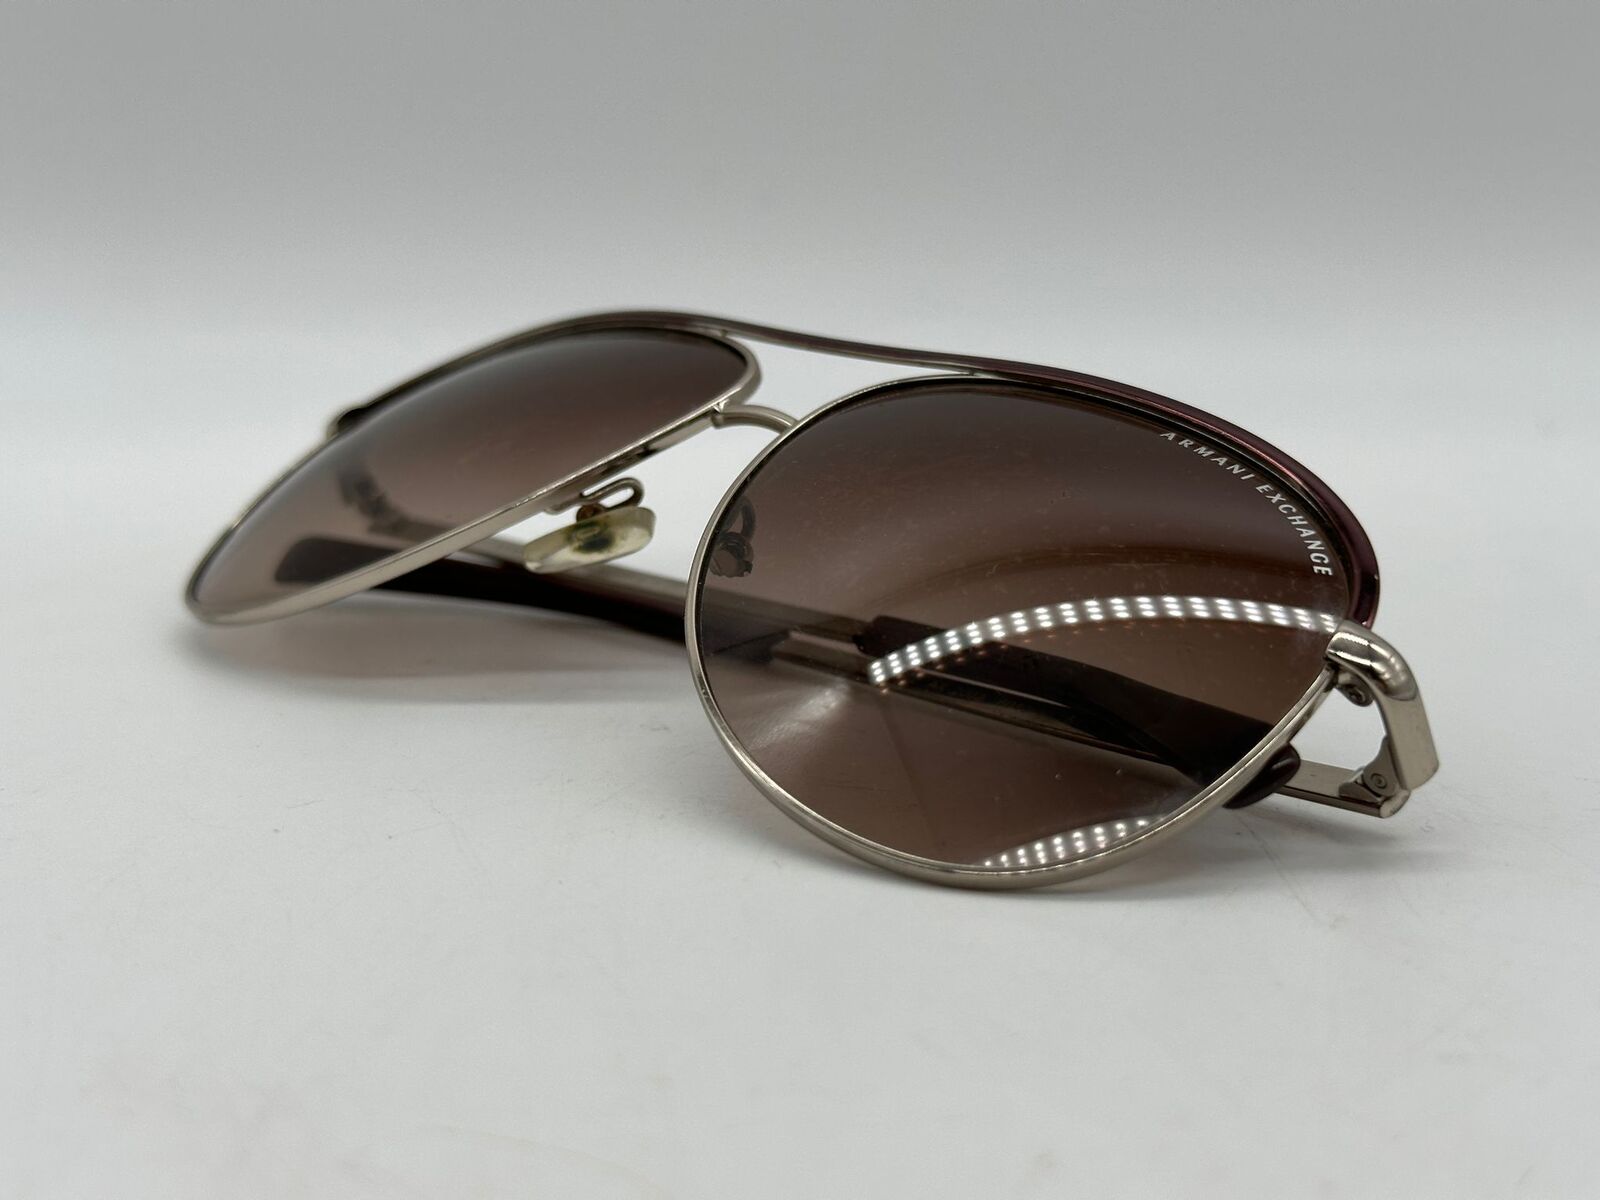 Armani Exchange Sunglasses AX 2002 Light Gold/Dark Brown (Pre-owned)